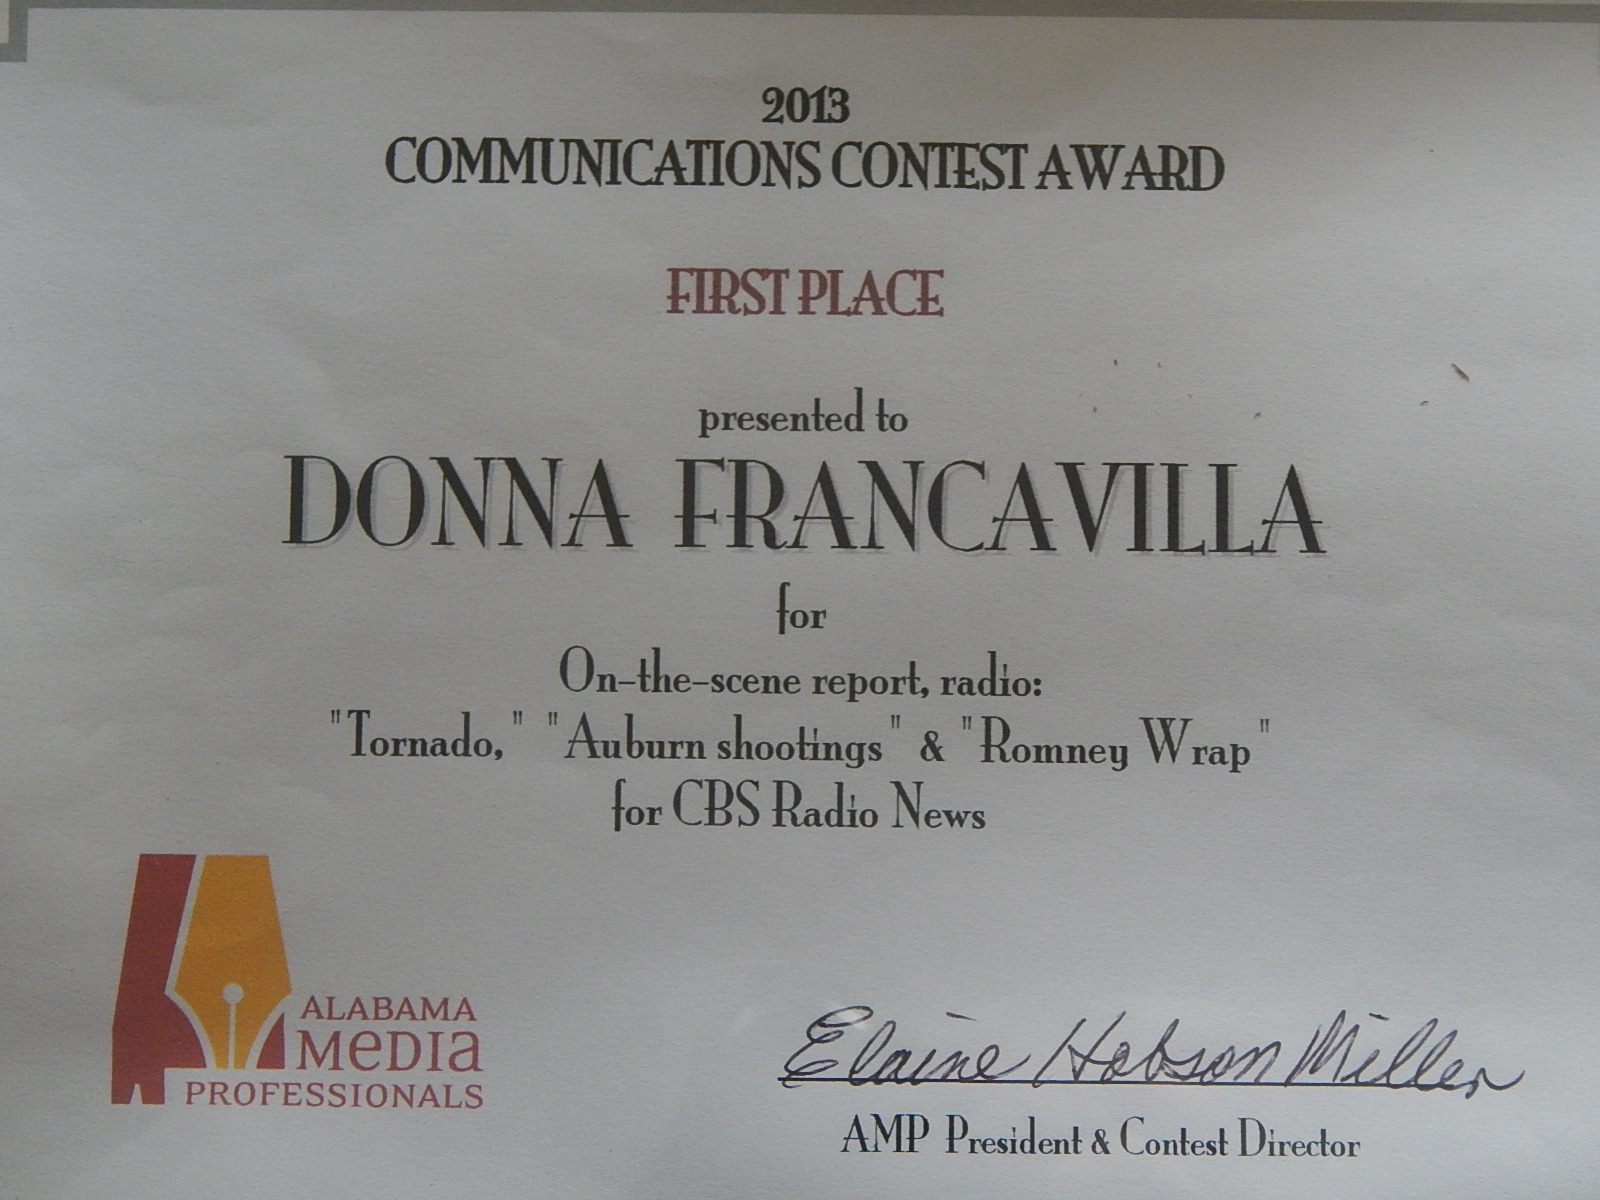 2013 Alabama Media Professionals Communications Contest Award – State Award – First Place presented to Donna Francavilla for On-The-Scene Report – Radio “Tornado”,”Auburn Shootings” & “Romney Wrap” for CBS Radio News